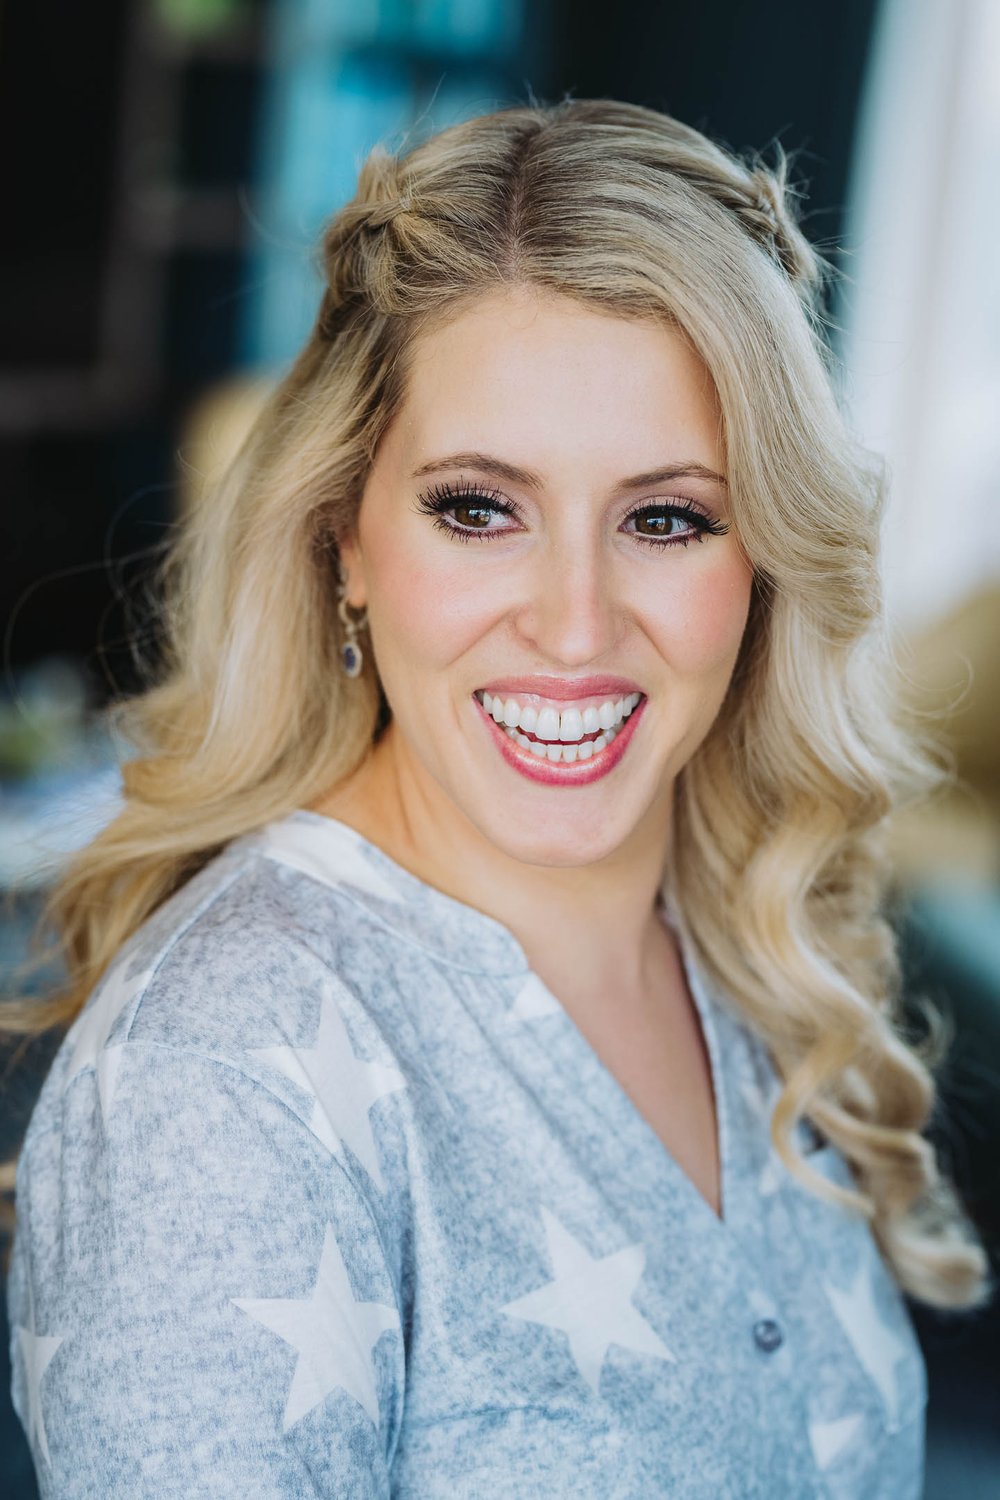 Wedding Day Photos | Ravenswood Event Center | J. Brown Photography | fun portrait of bride getting ready